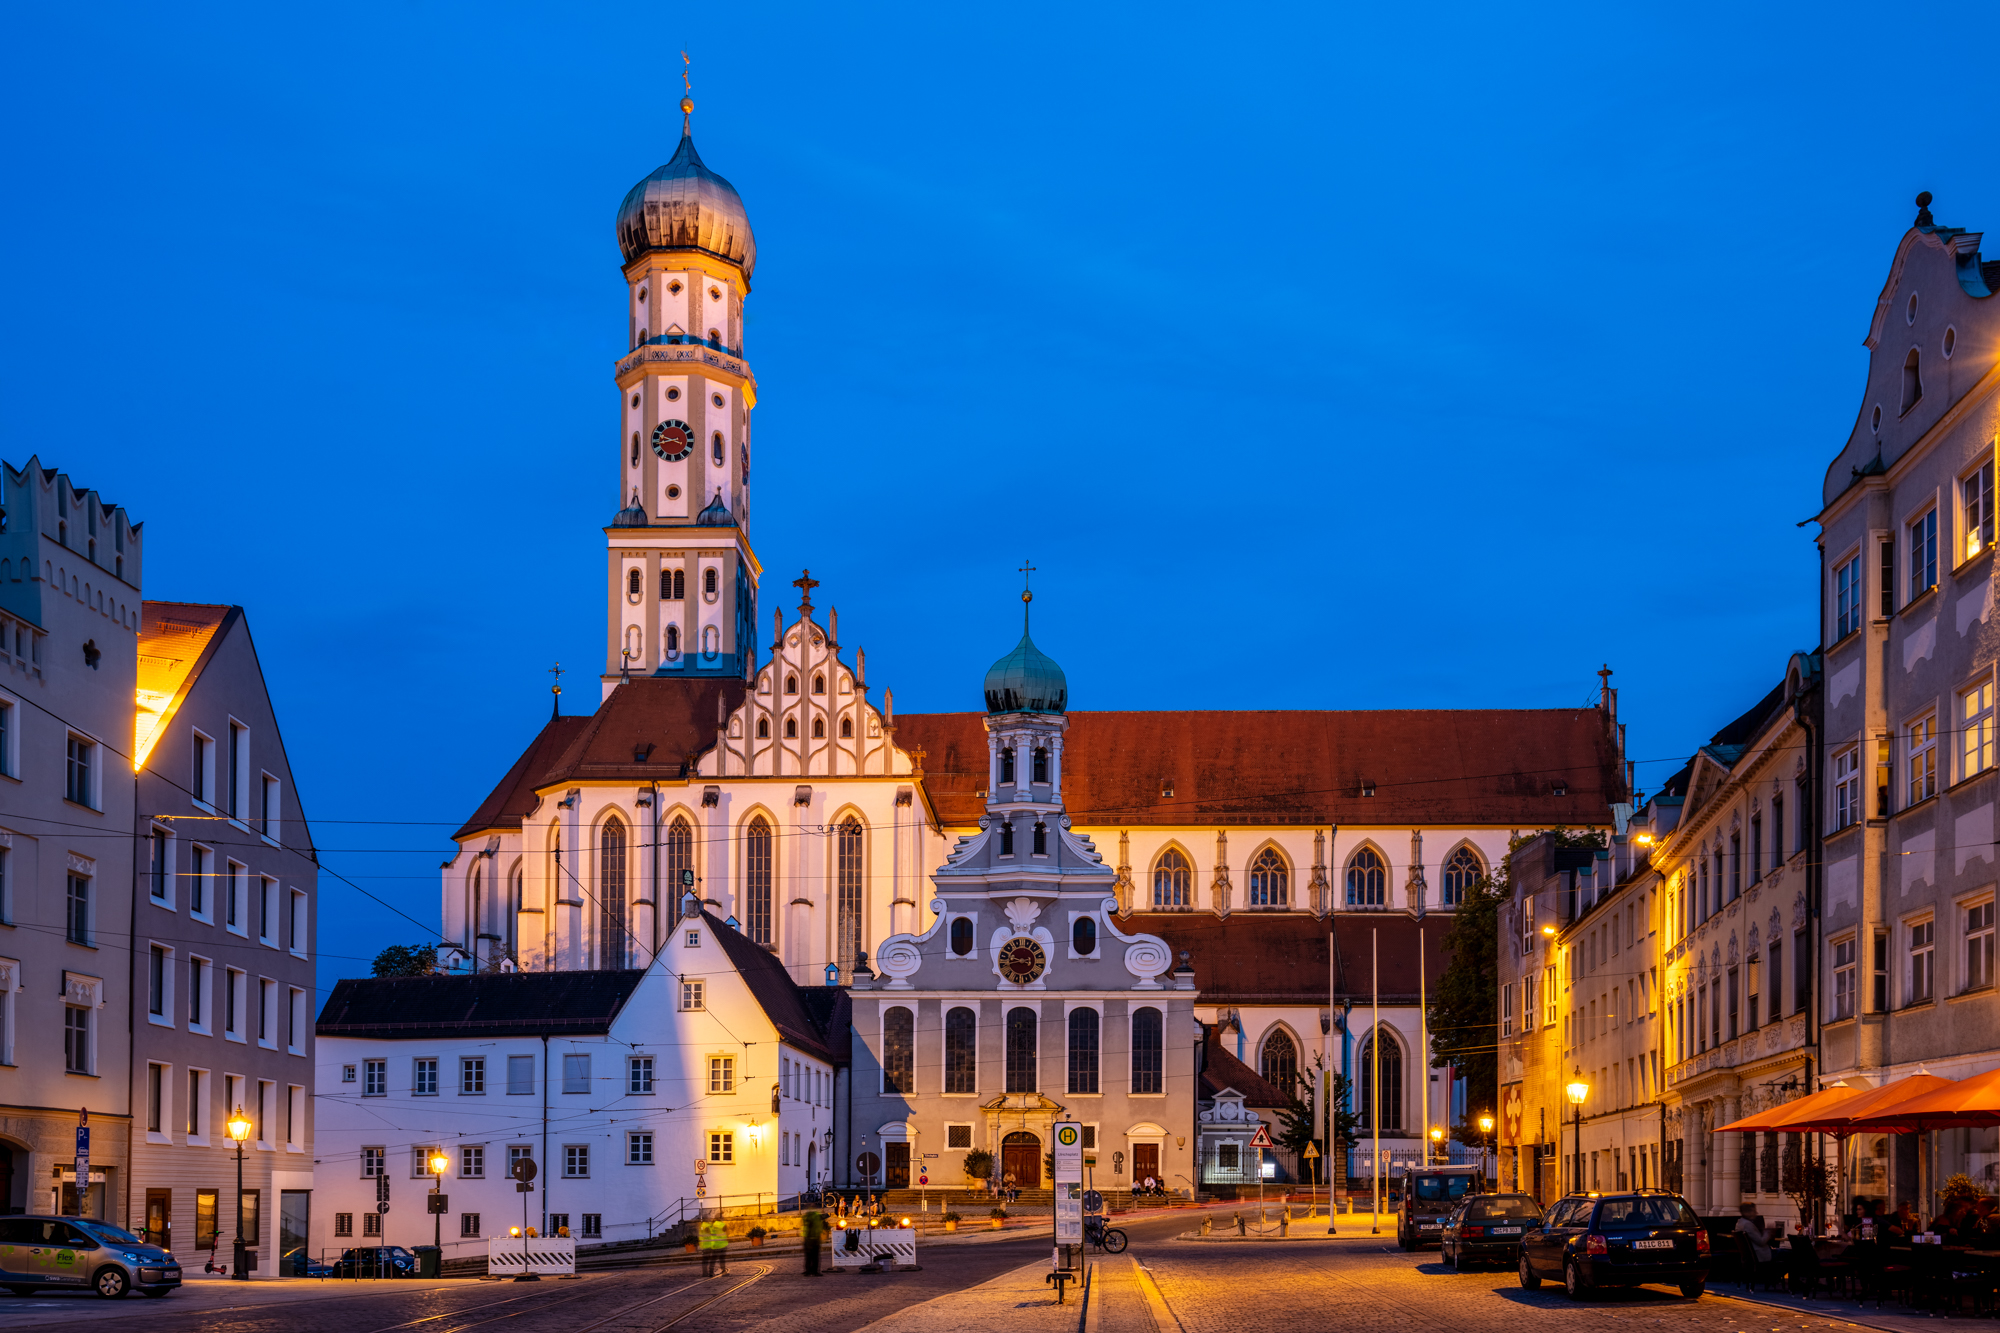 Basilica of SS. Ulrich and Afra, Augsburg, Bavaria, Germany. The catholic parish, one of the best examples of Gothic architecture in Germany, originated from the Roman tomb of St. Afra, which was martyred in 304. Its high bell tower with an "onion" dome, which dominates the city to the south, served as a prototype for the construction of numerous baroque towers of Bavaria. The church was officially elevated to the rank of imperial abbey in 1577 and in the anniversary 200 years later, Wolfgang Amadeus Mozart held and organ concert there.